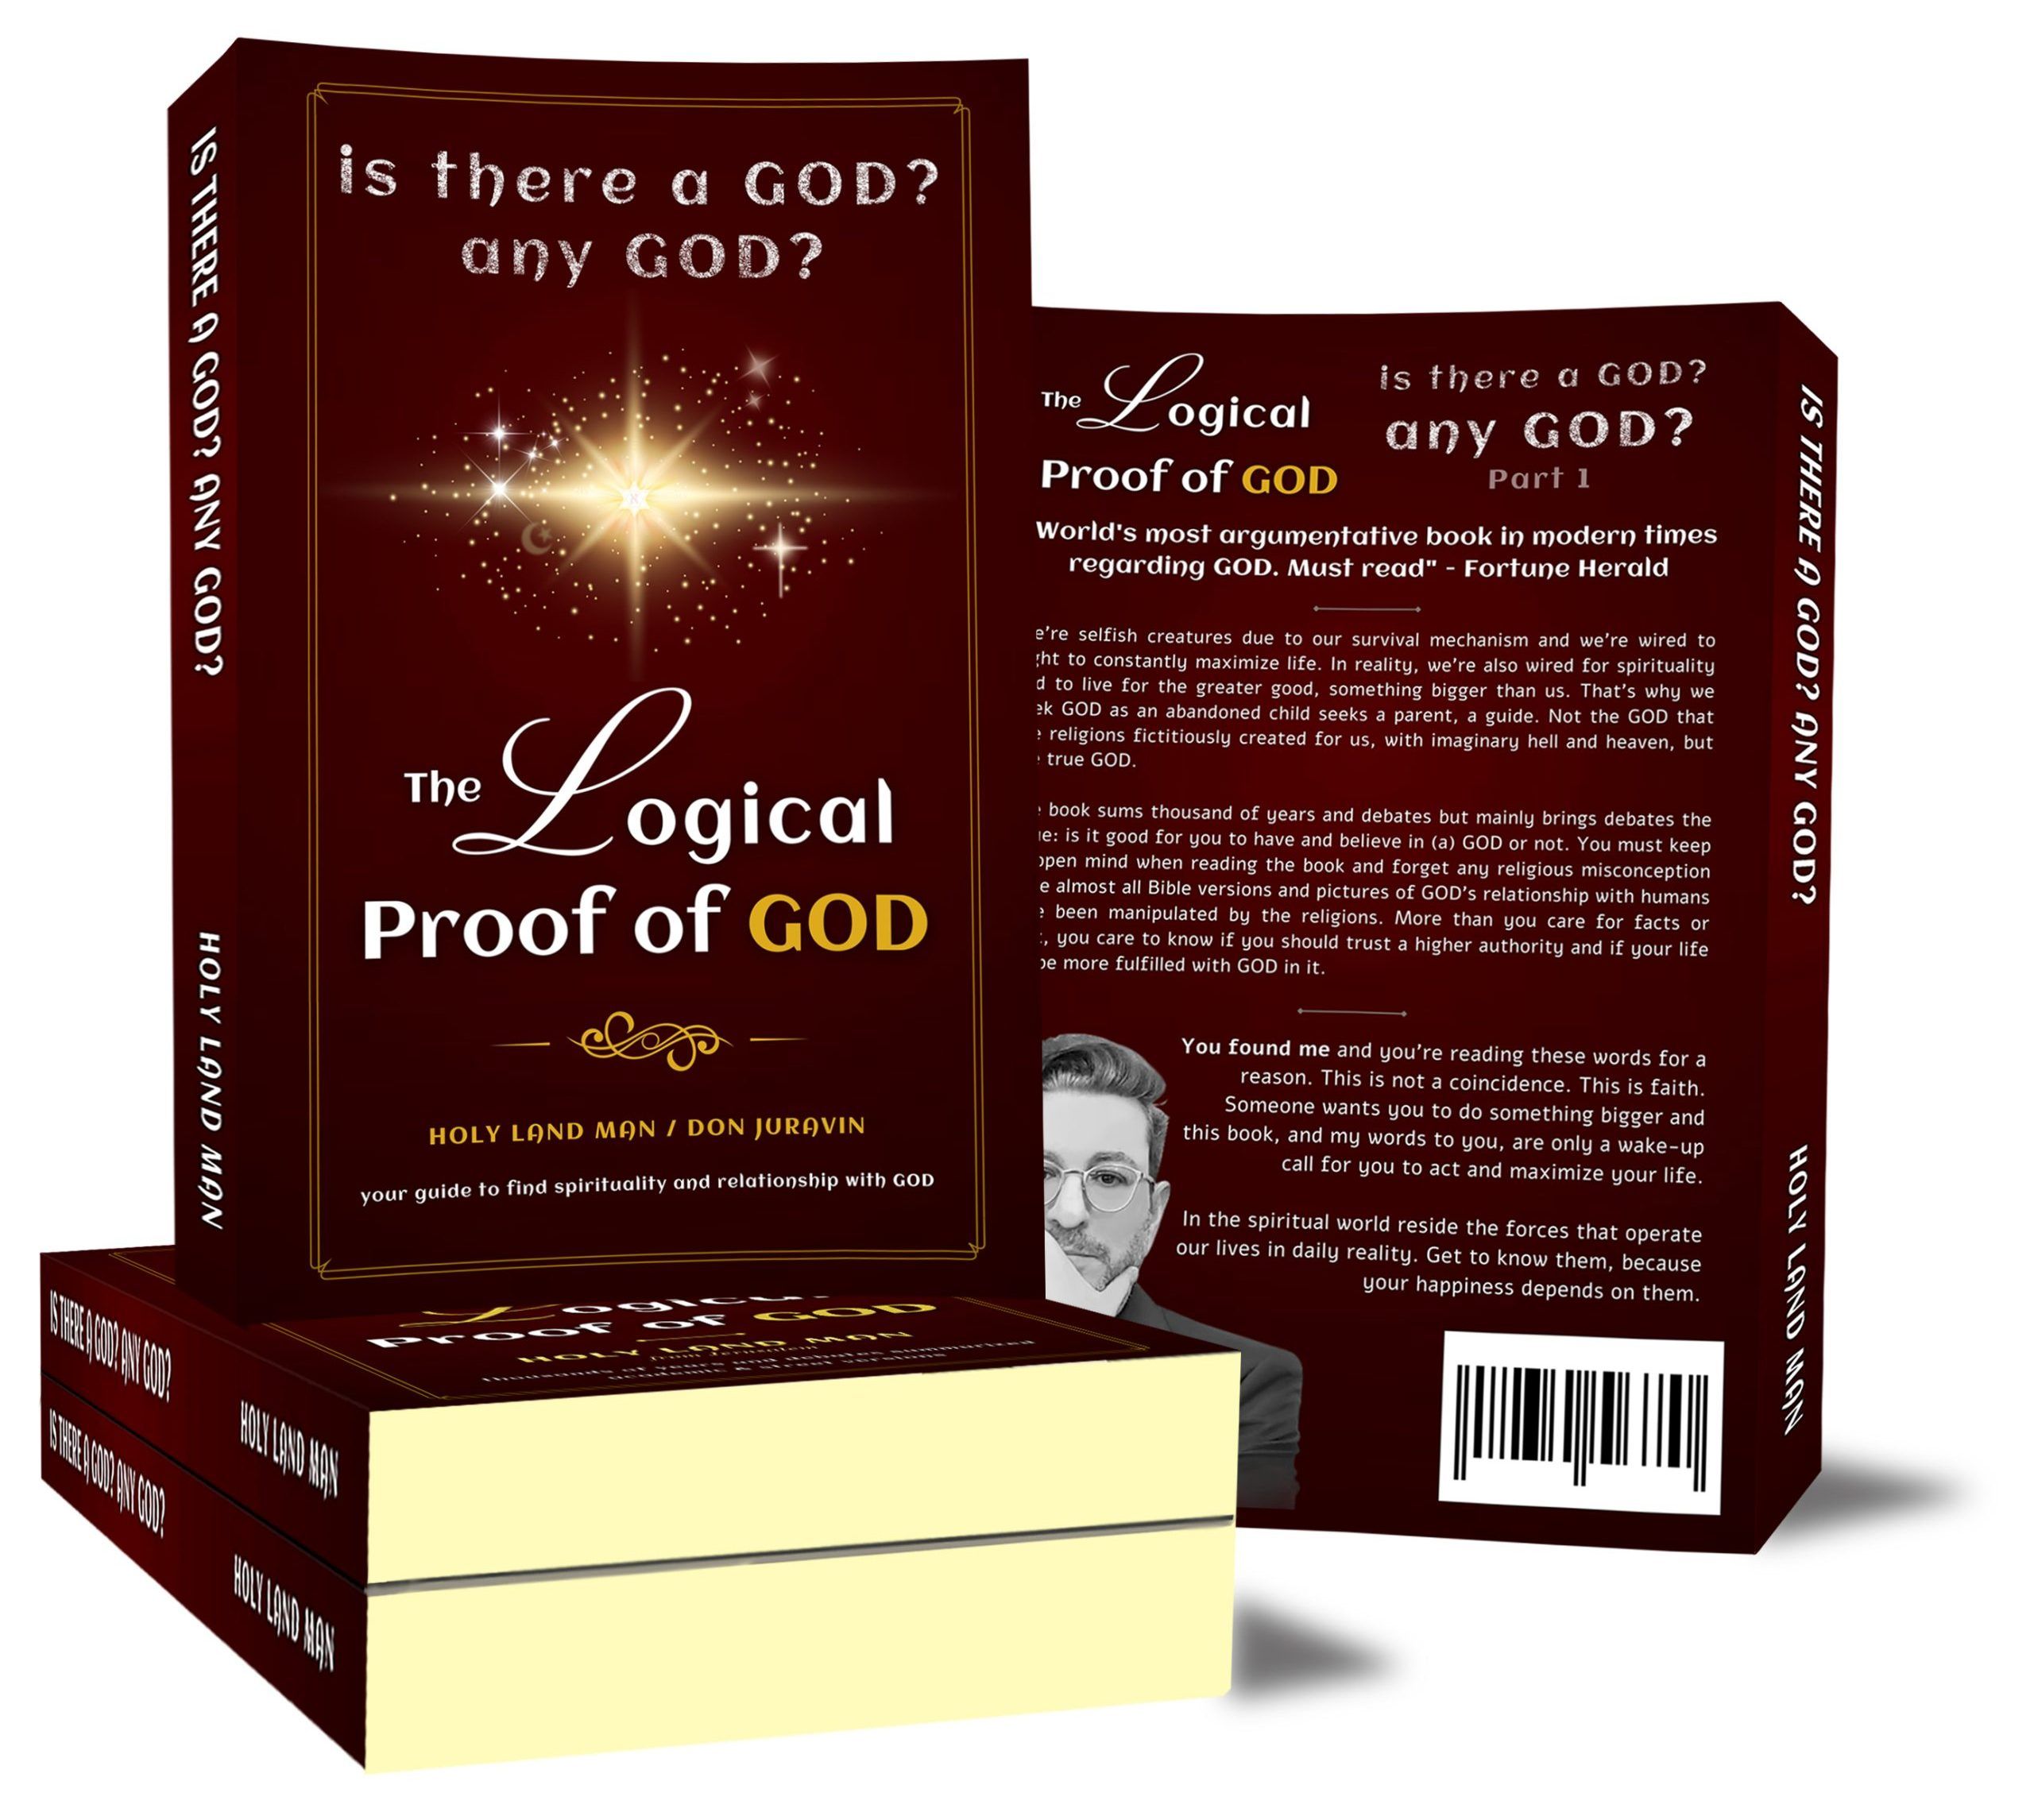 The logical proof of GOD book by Don Juravin